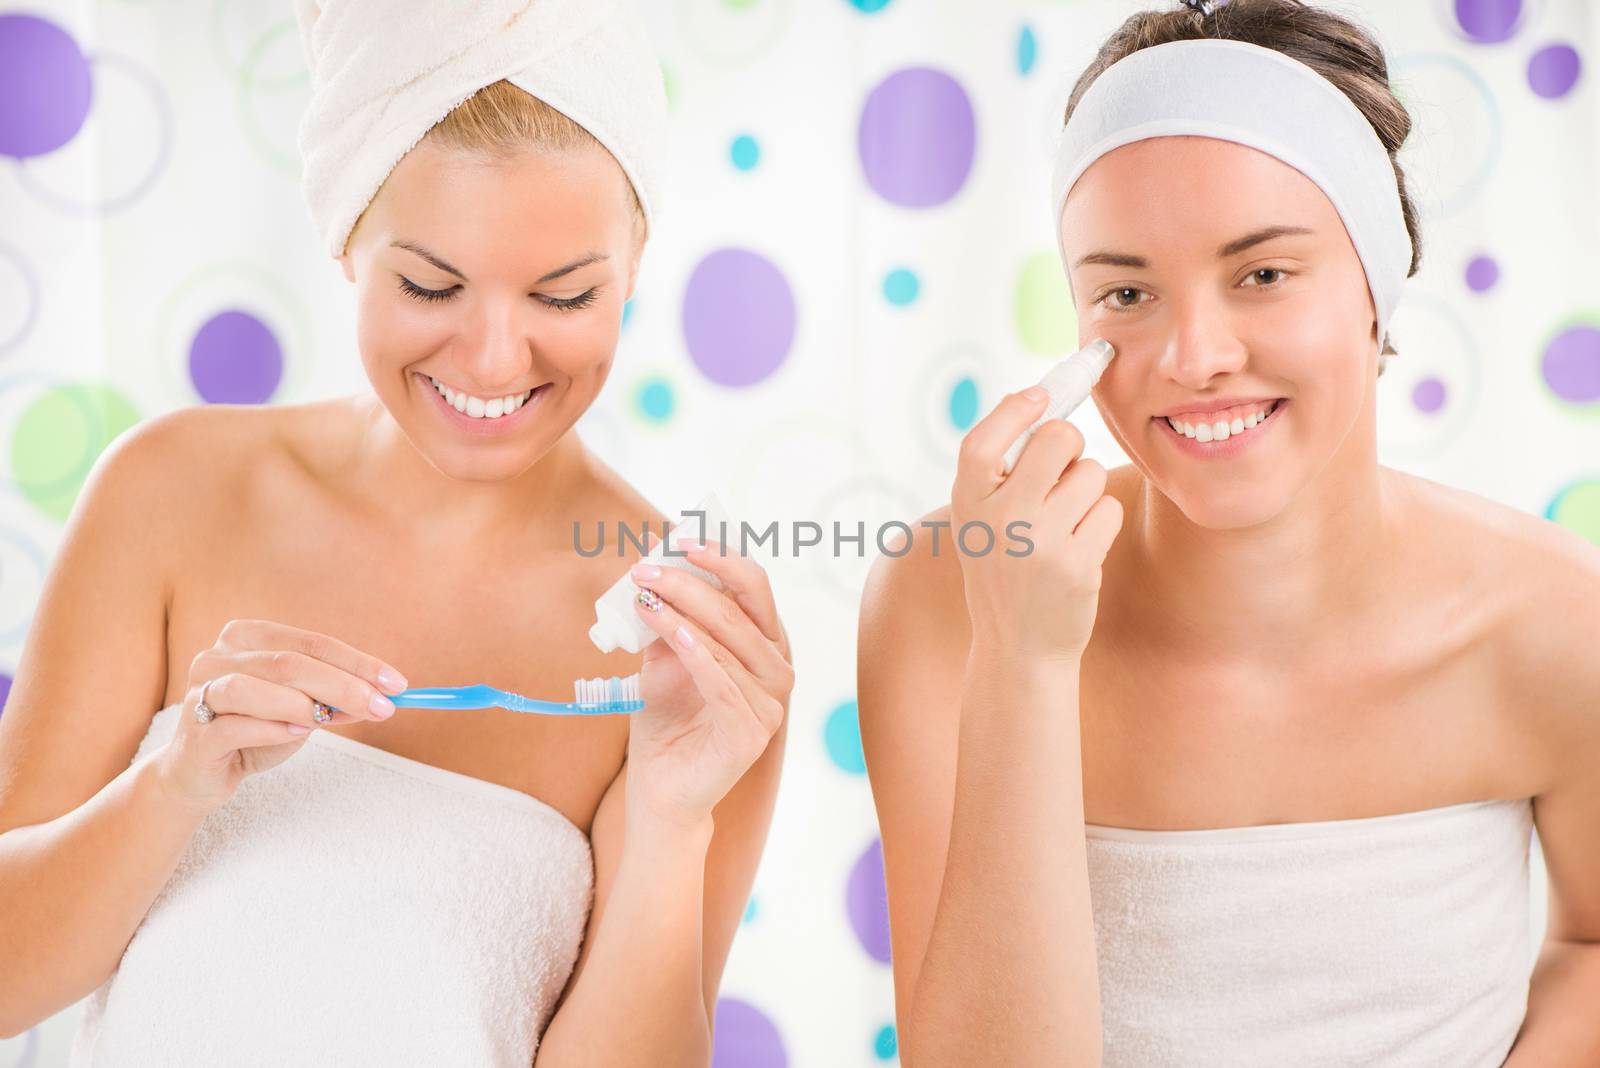 Two young cute woman preparing to start their day. One girl brushing teeth, the other girl applying cream.